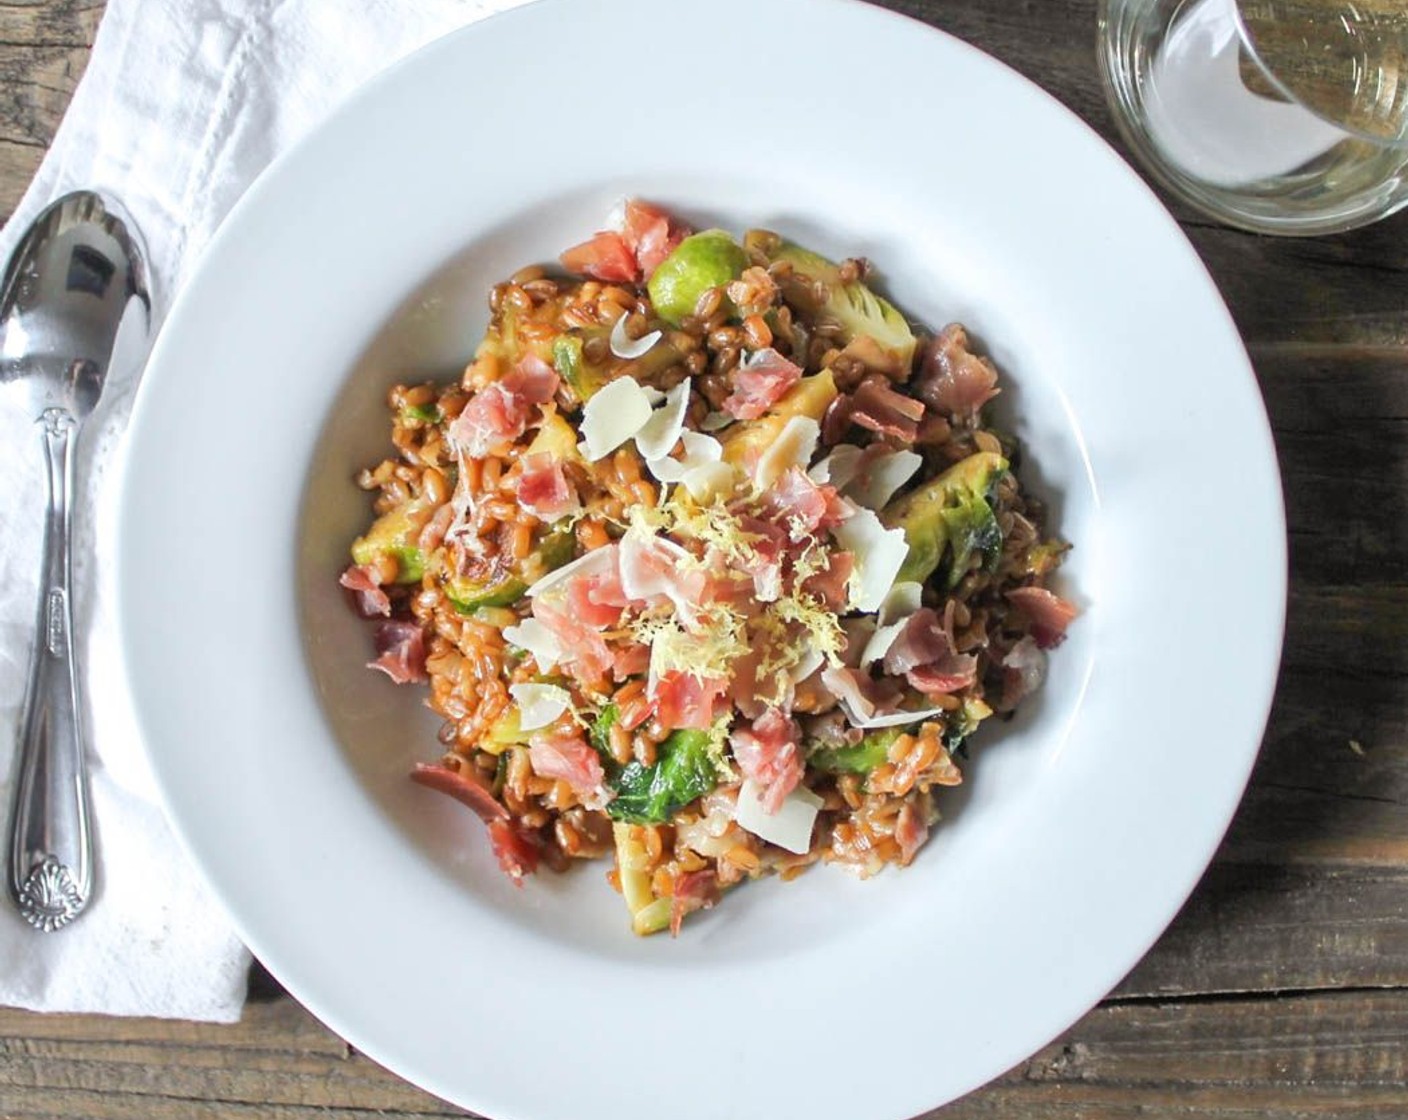 Farro Risotto with Prosciutto and Brussels Sprouts